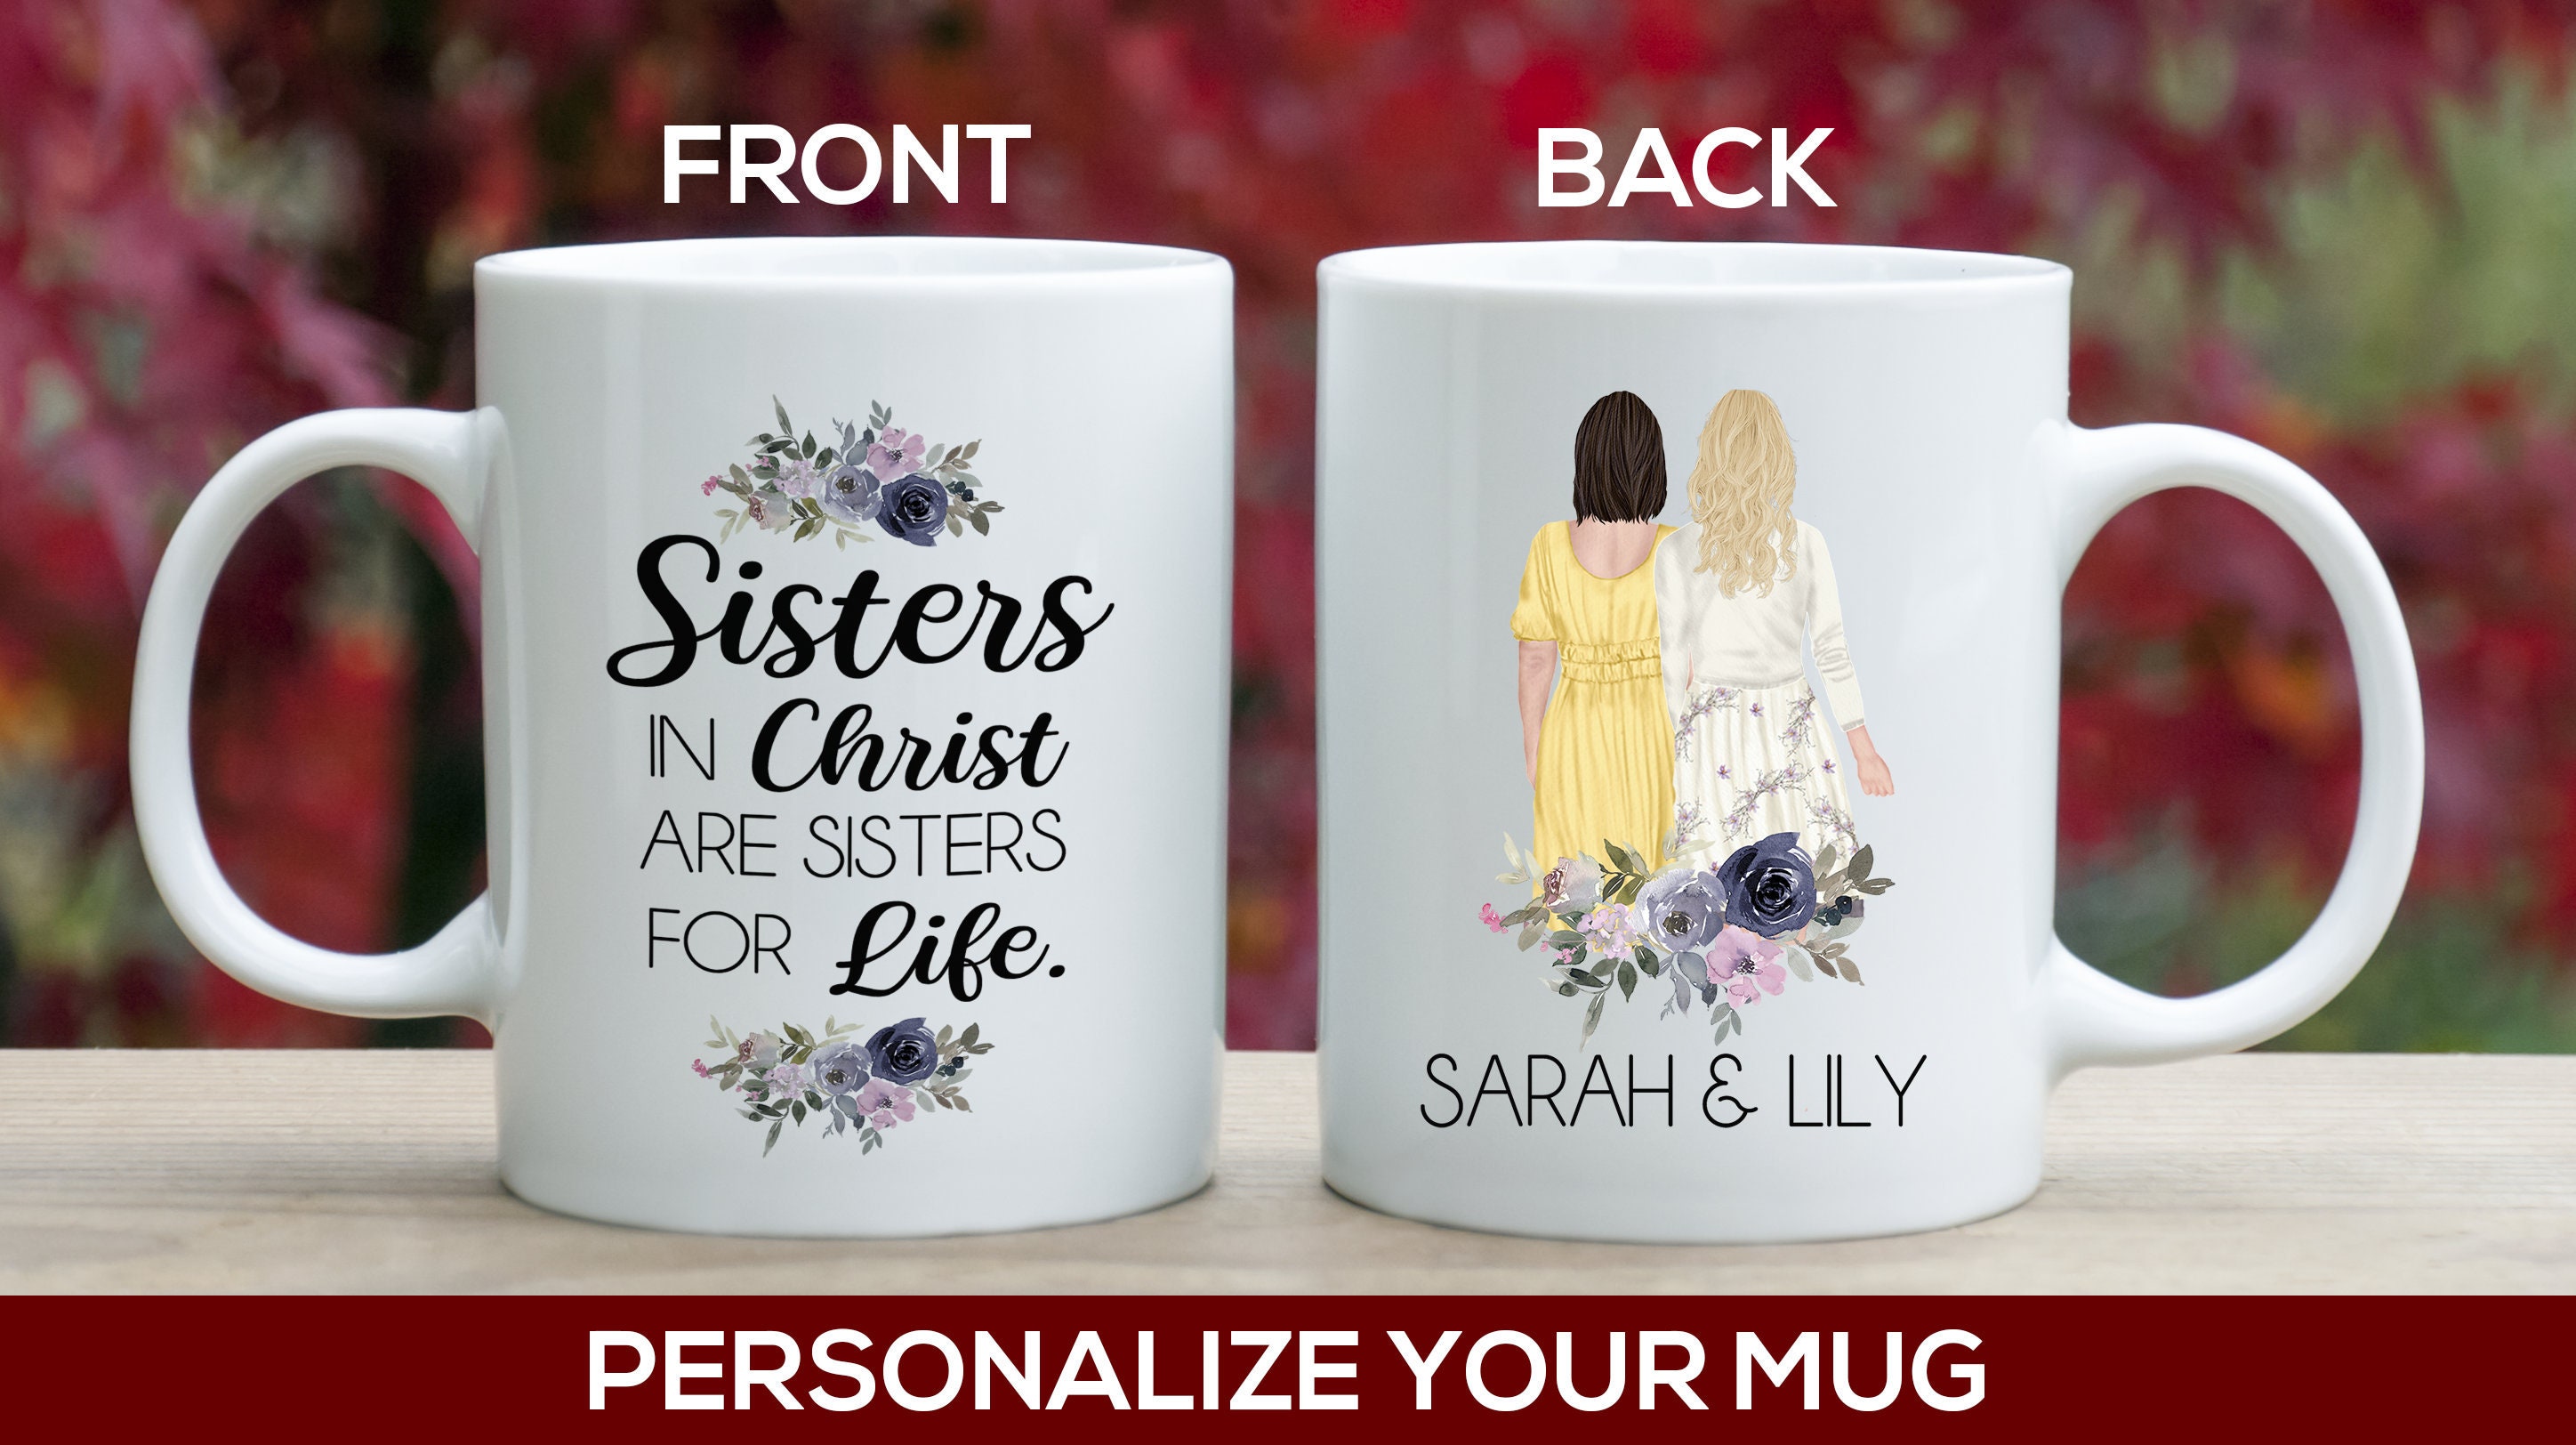 Birthday Gifts For Women - Christian Gifts For Women - Friend Gifts For  Women Birthday Unique - Inspirational Gifts For Women, Religious Gifts For  Women - Spiritual Gifts For Women Gifts Tumbler 20 Oz 